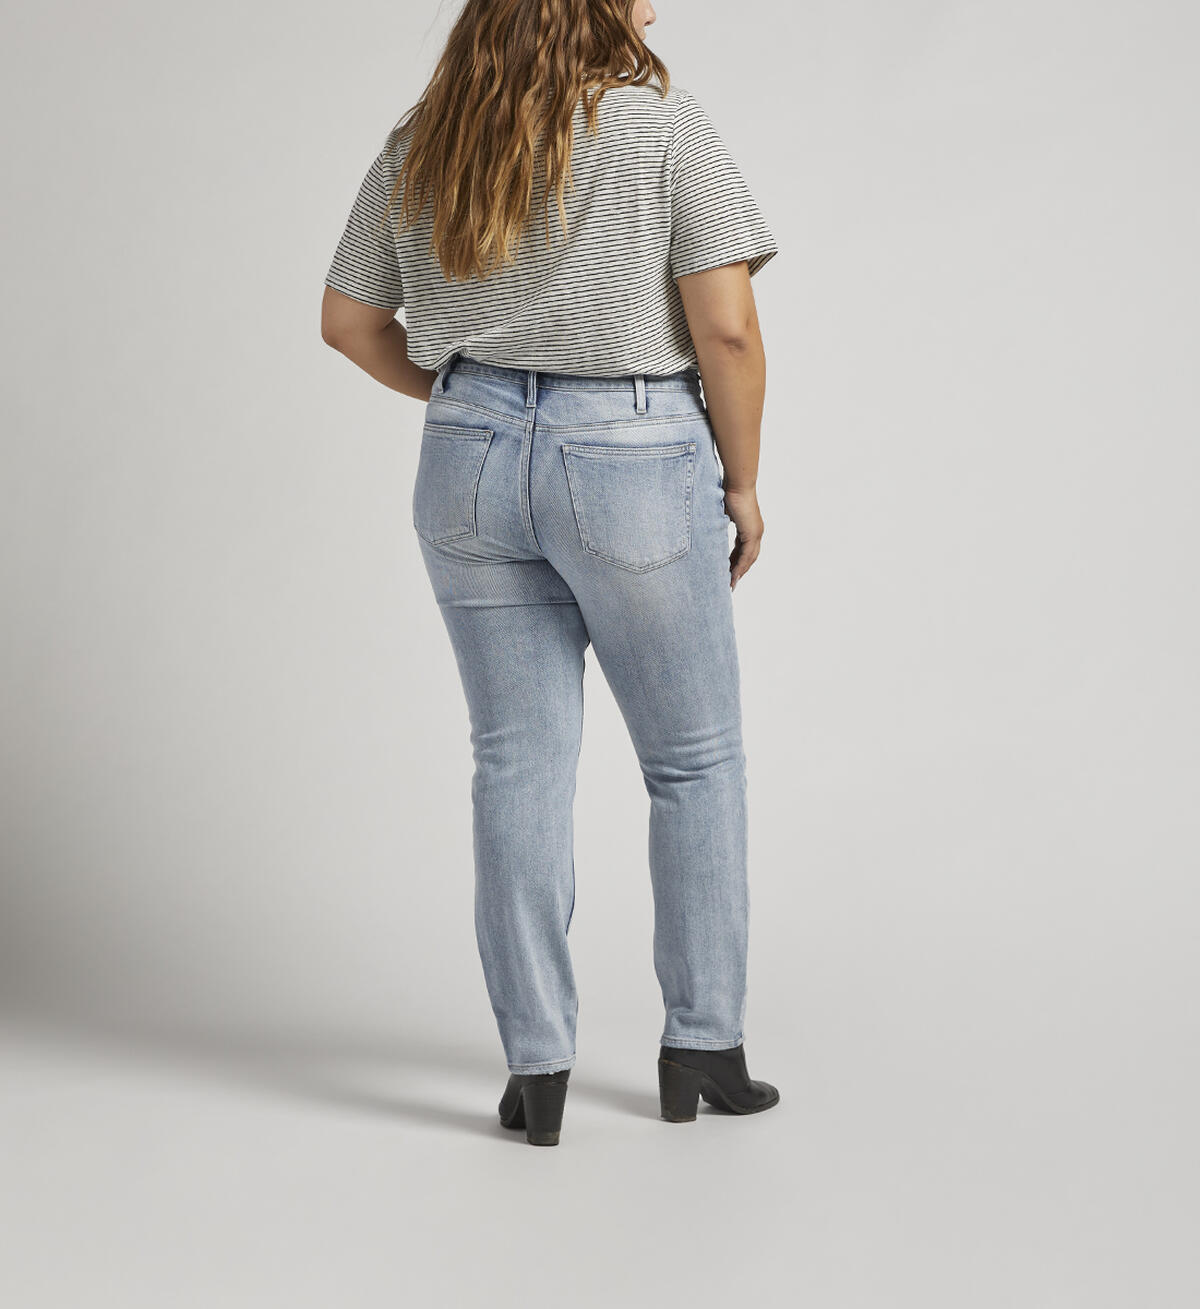 Most Wanted Mid Rise Straight Leg Jeans Plus Size, Indigo, hi-res image number 1